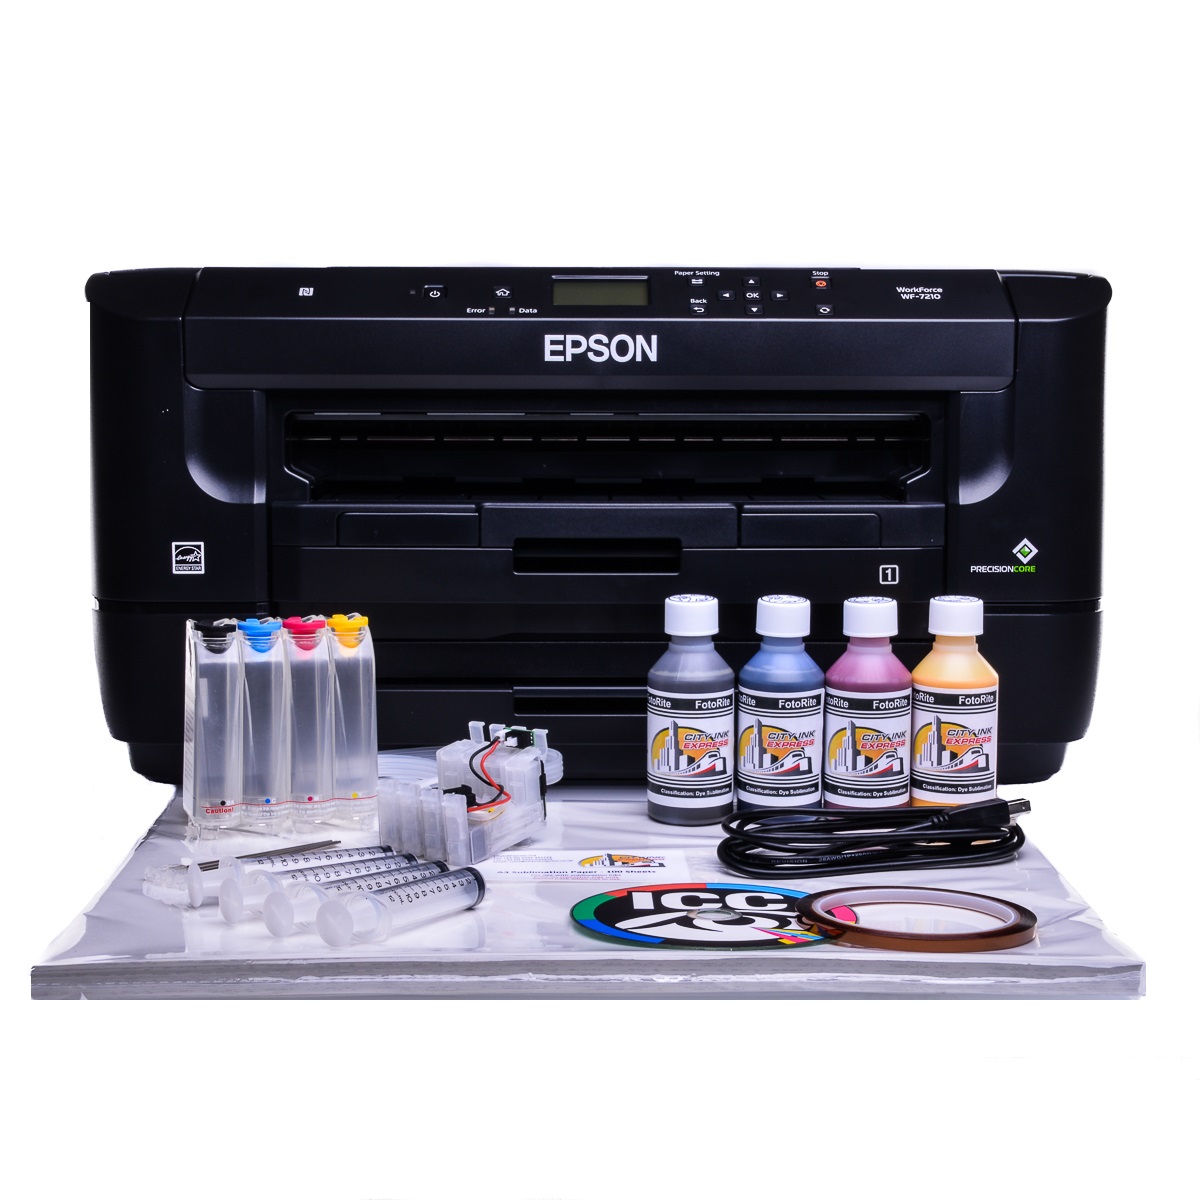 Epson Wf 7210dtw A3 Sublimation Printer Bundle With Ciss And 4 X 100ml Ink Ebay 3880